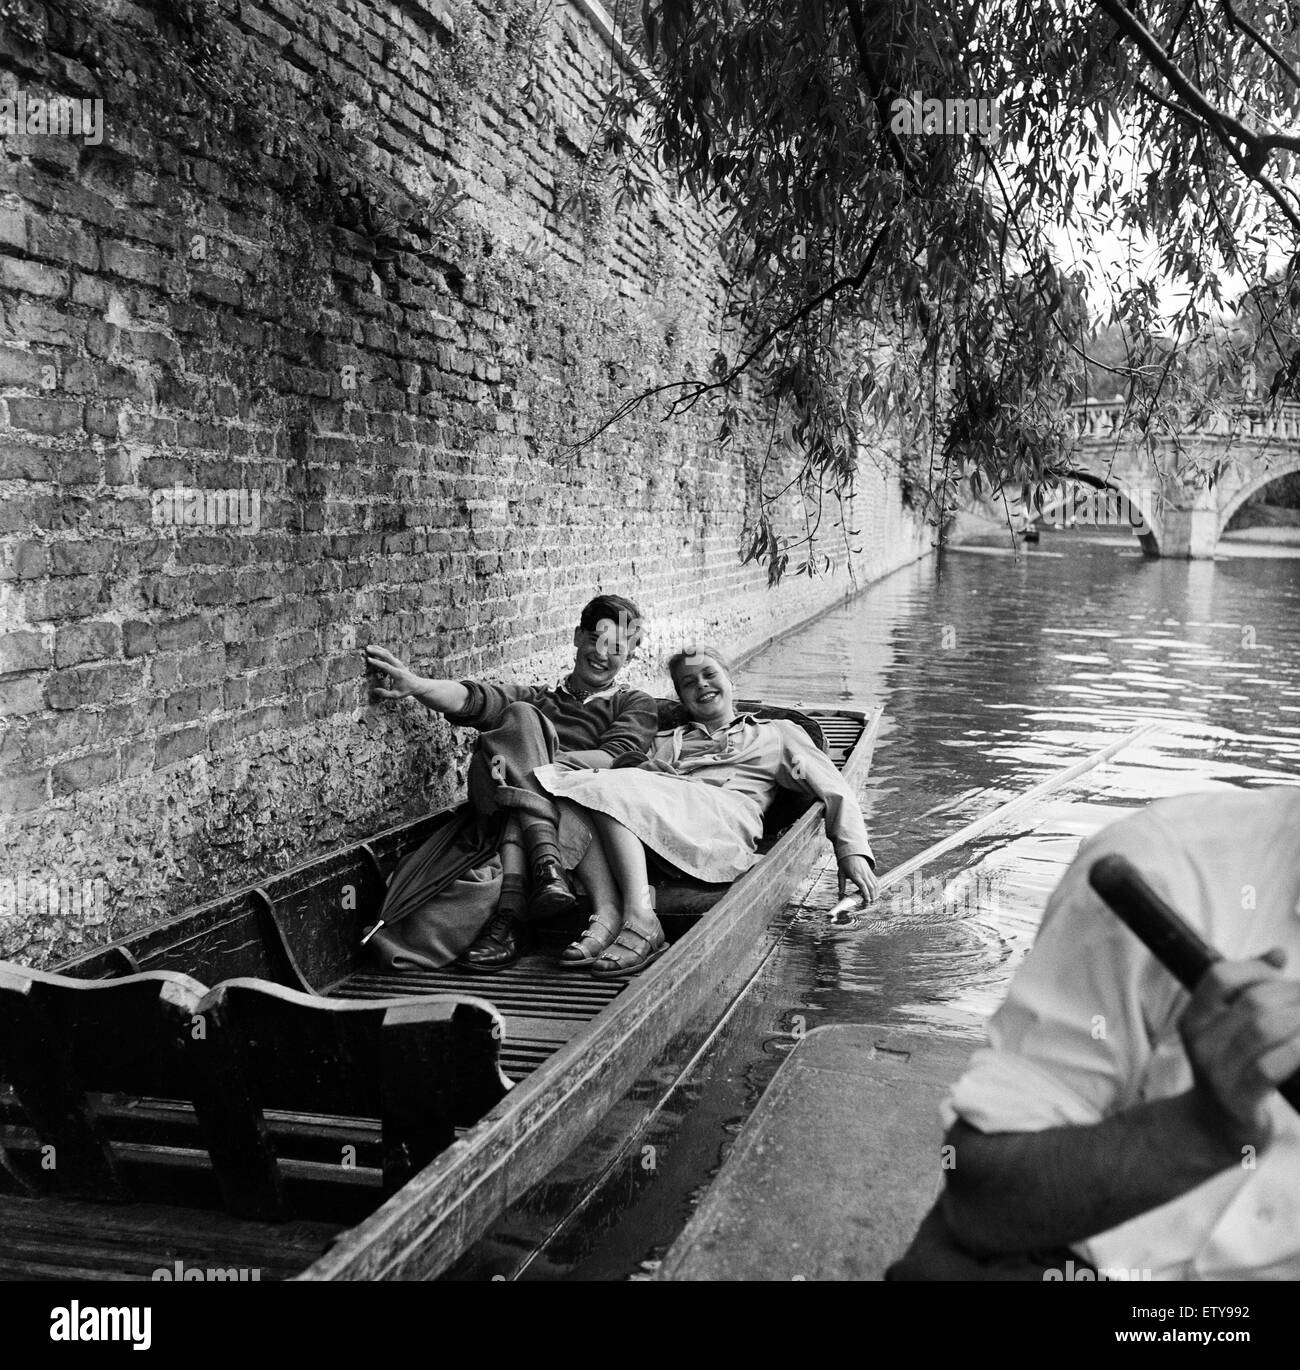 On the river Cam in Cambridge resting in a punt are James Innes of St Catherine's college where he reads modern languages and Irene Cassel from Göttingen, Lower Saxony who is studying English for a year. What do they do in a punt together? They study Lang Stock Photo